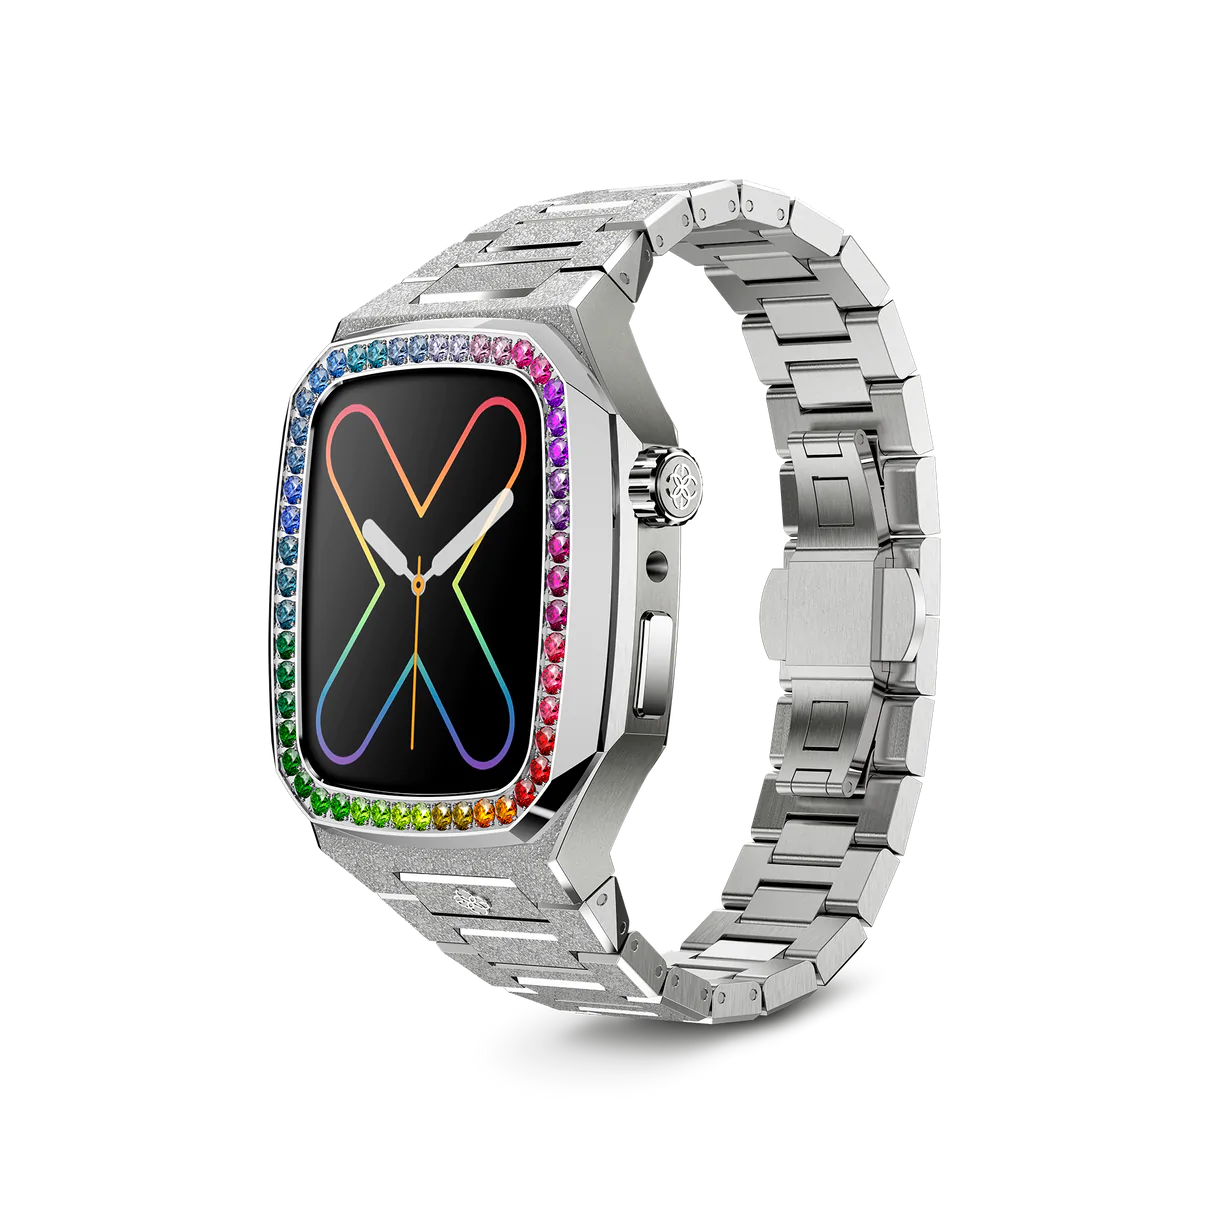 Golden Concept Apple Watch Case - EVF - RAINBOW Frosted Silver